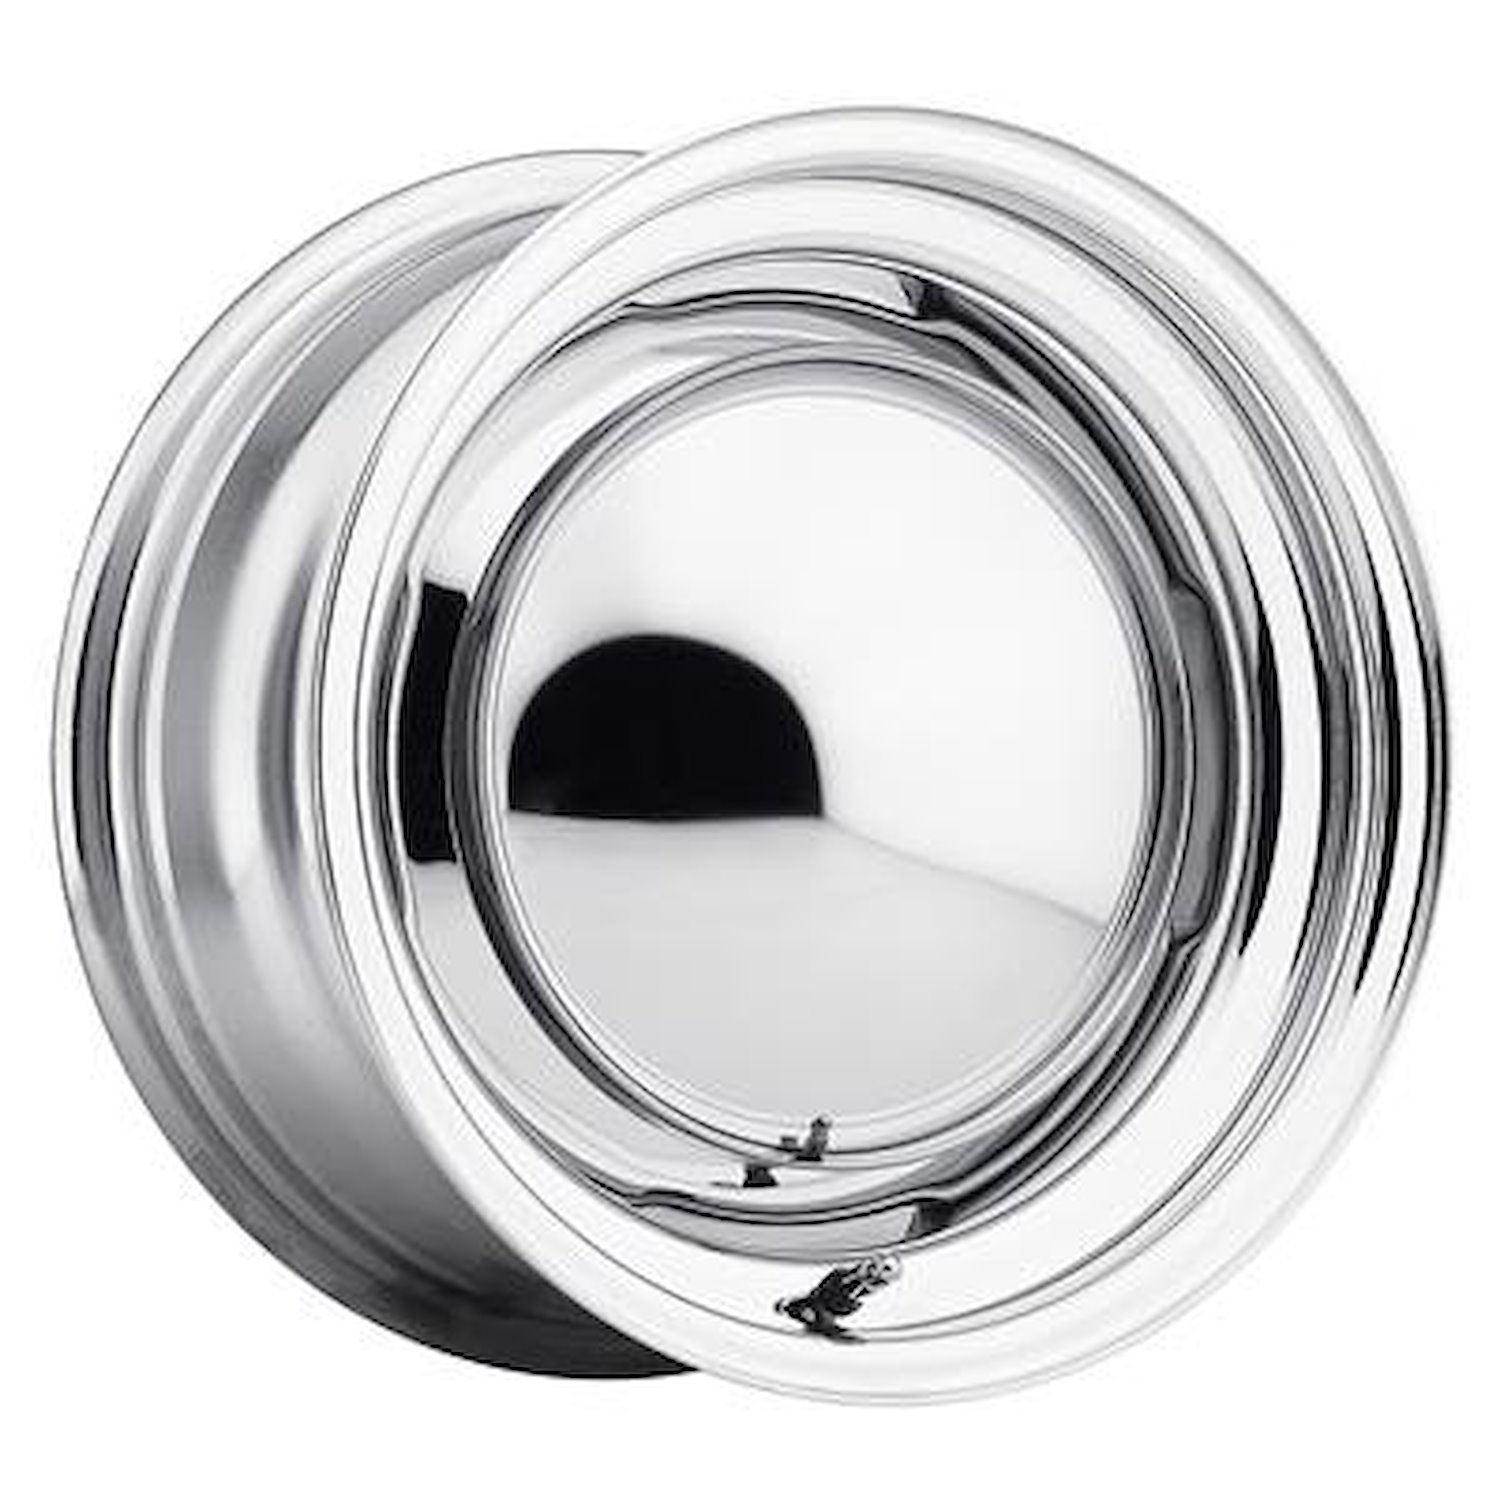 PAINT READY OEM 17X8 5X4.75 Back Space 0 Offset 2.875 Center Bore 1700 lbs Load Rating